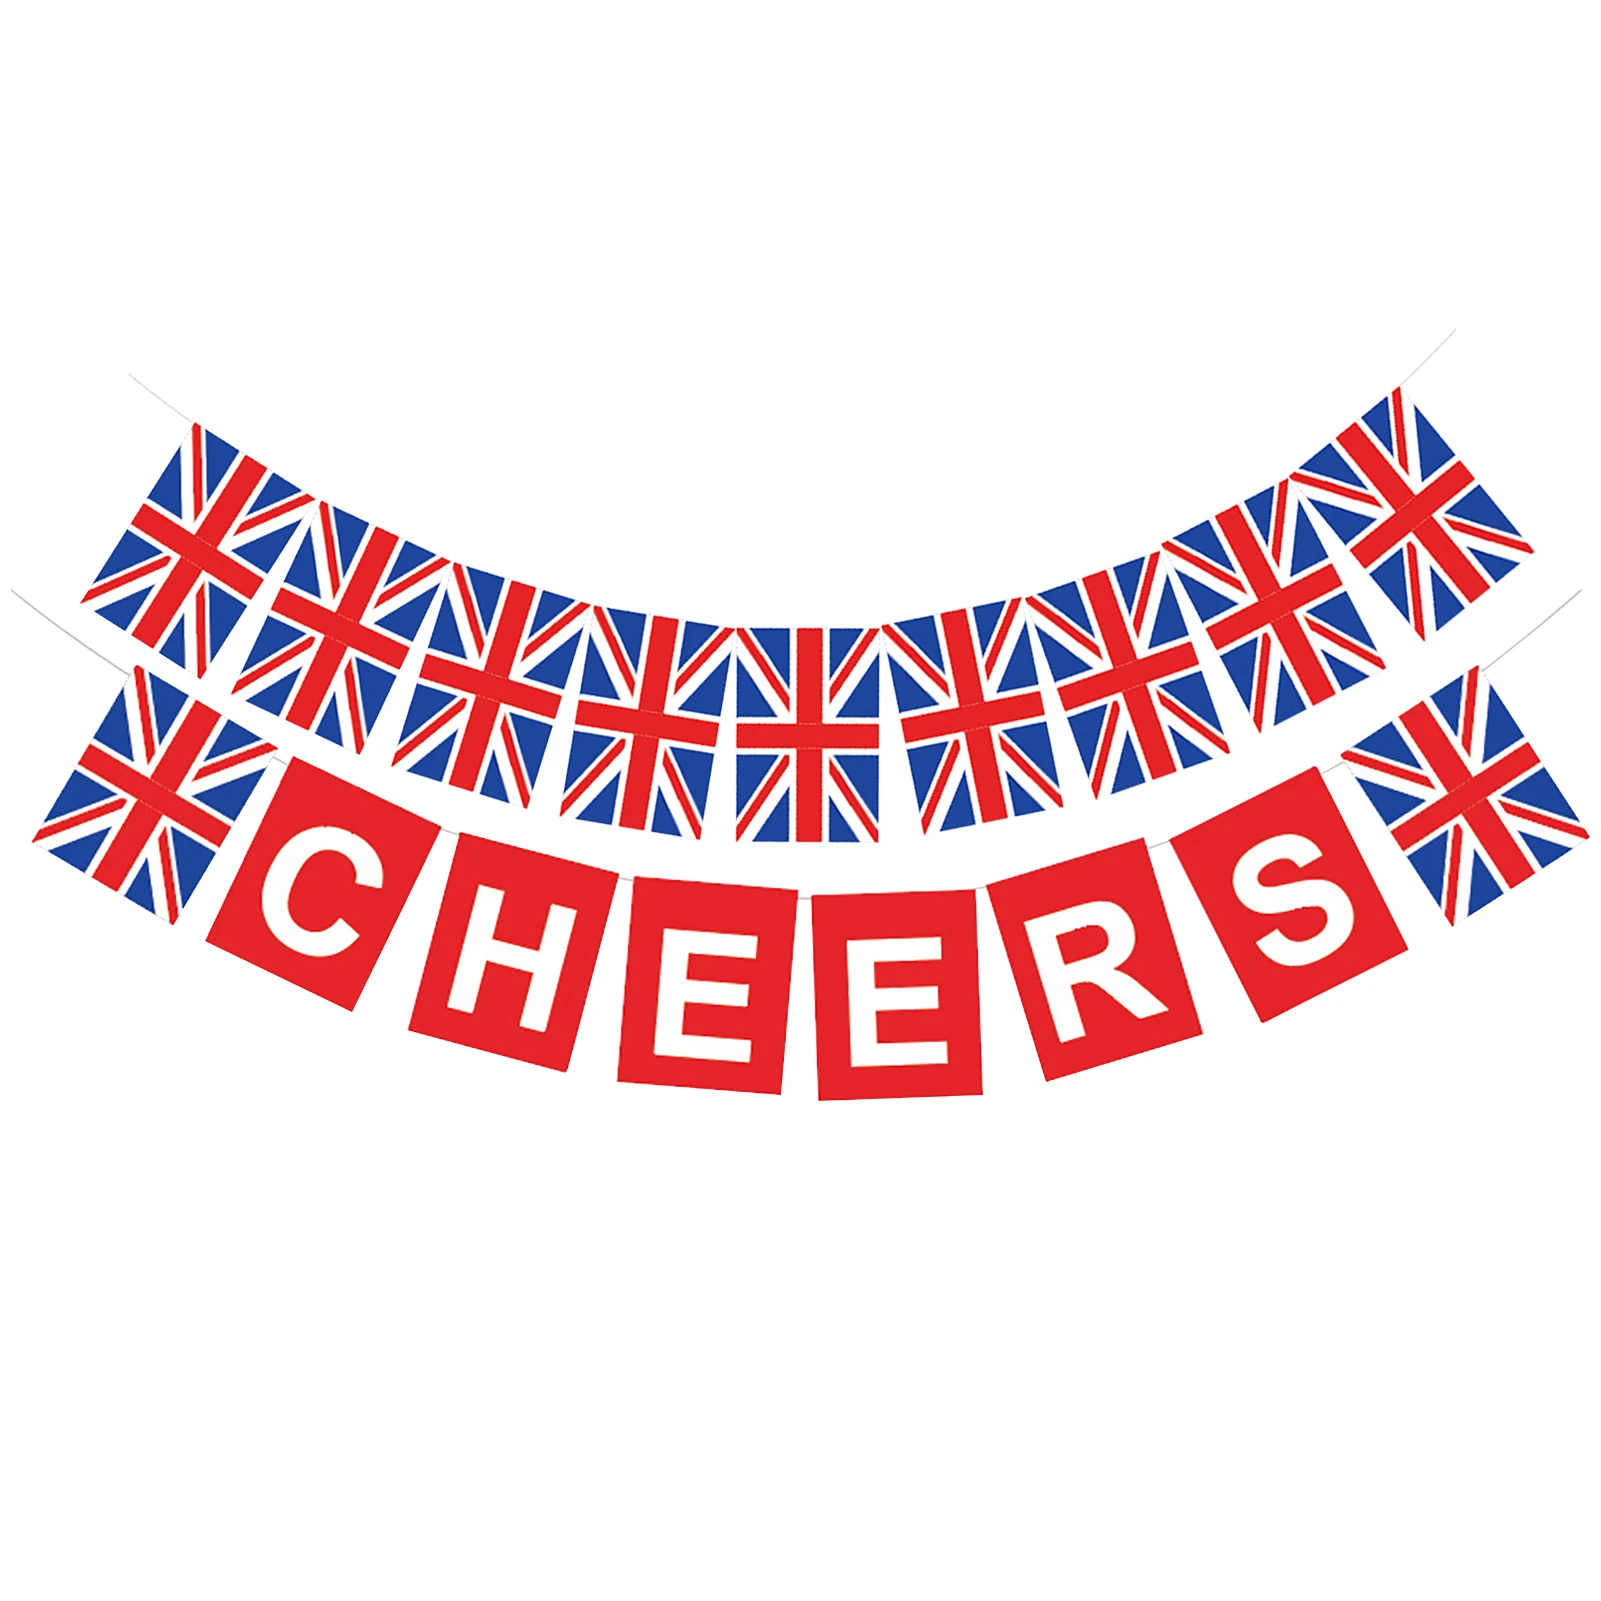 

British Flag Bunting Cheers Banner British Flag Bunting Includes Cheers Flag Banner And Letter Banner Perfect For Queen's